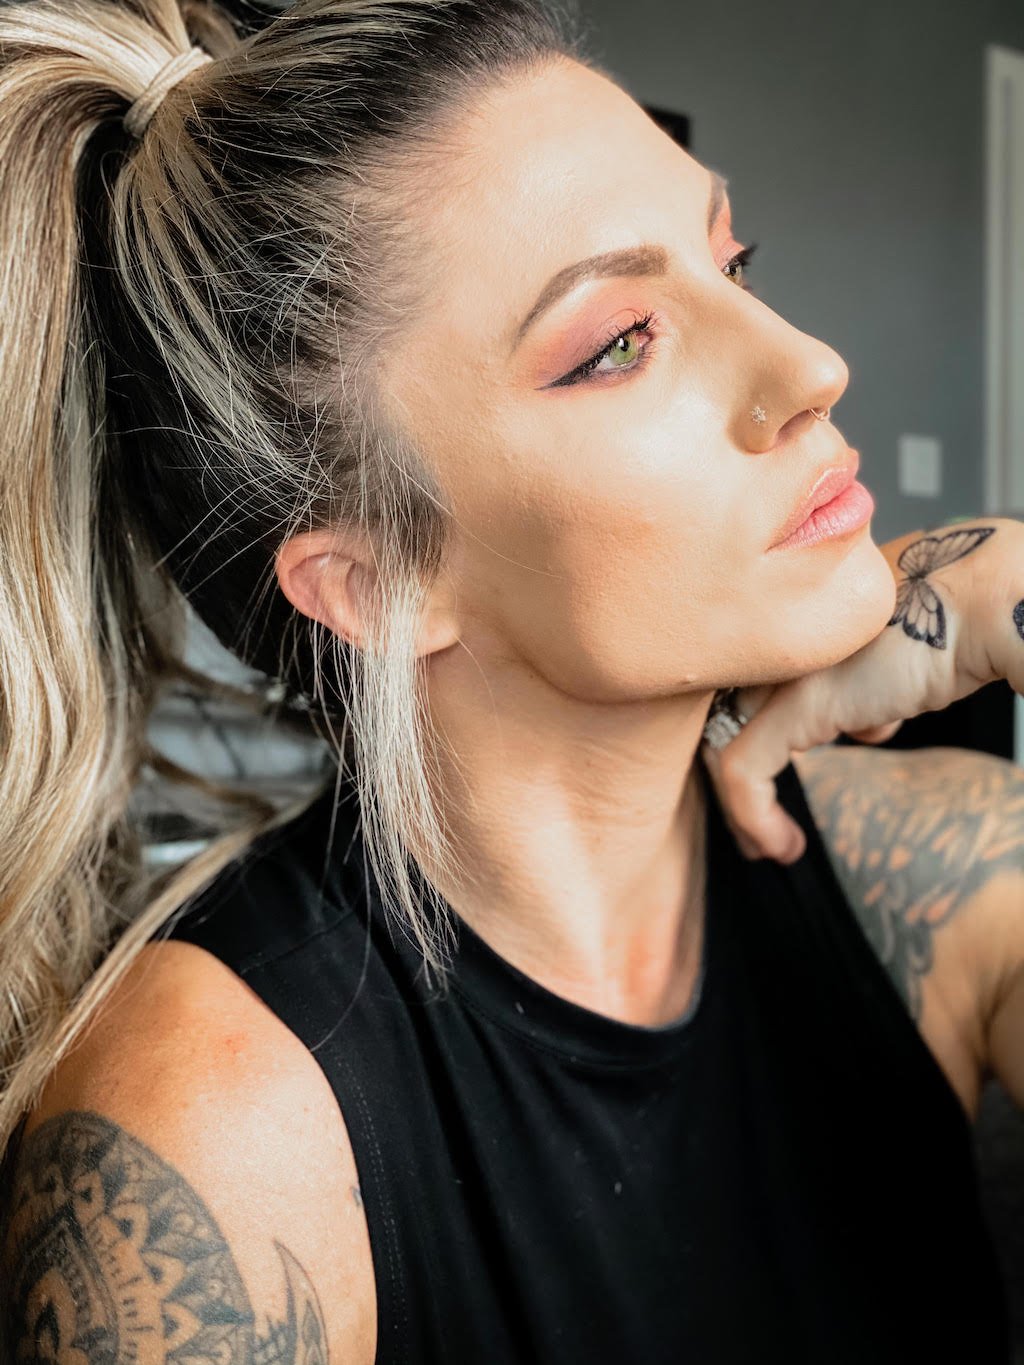 Woman with multiple tattoos and nose piercings